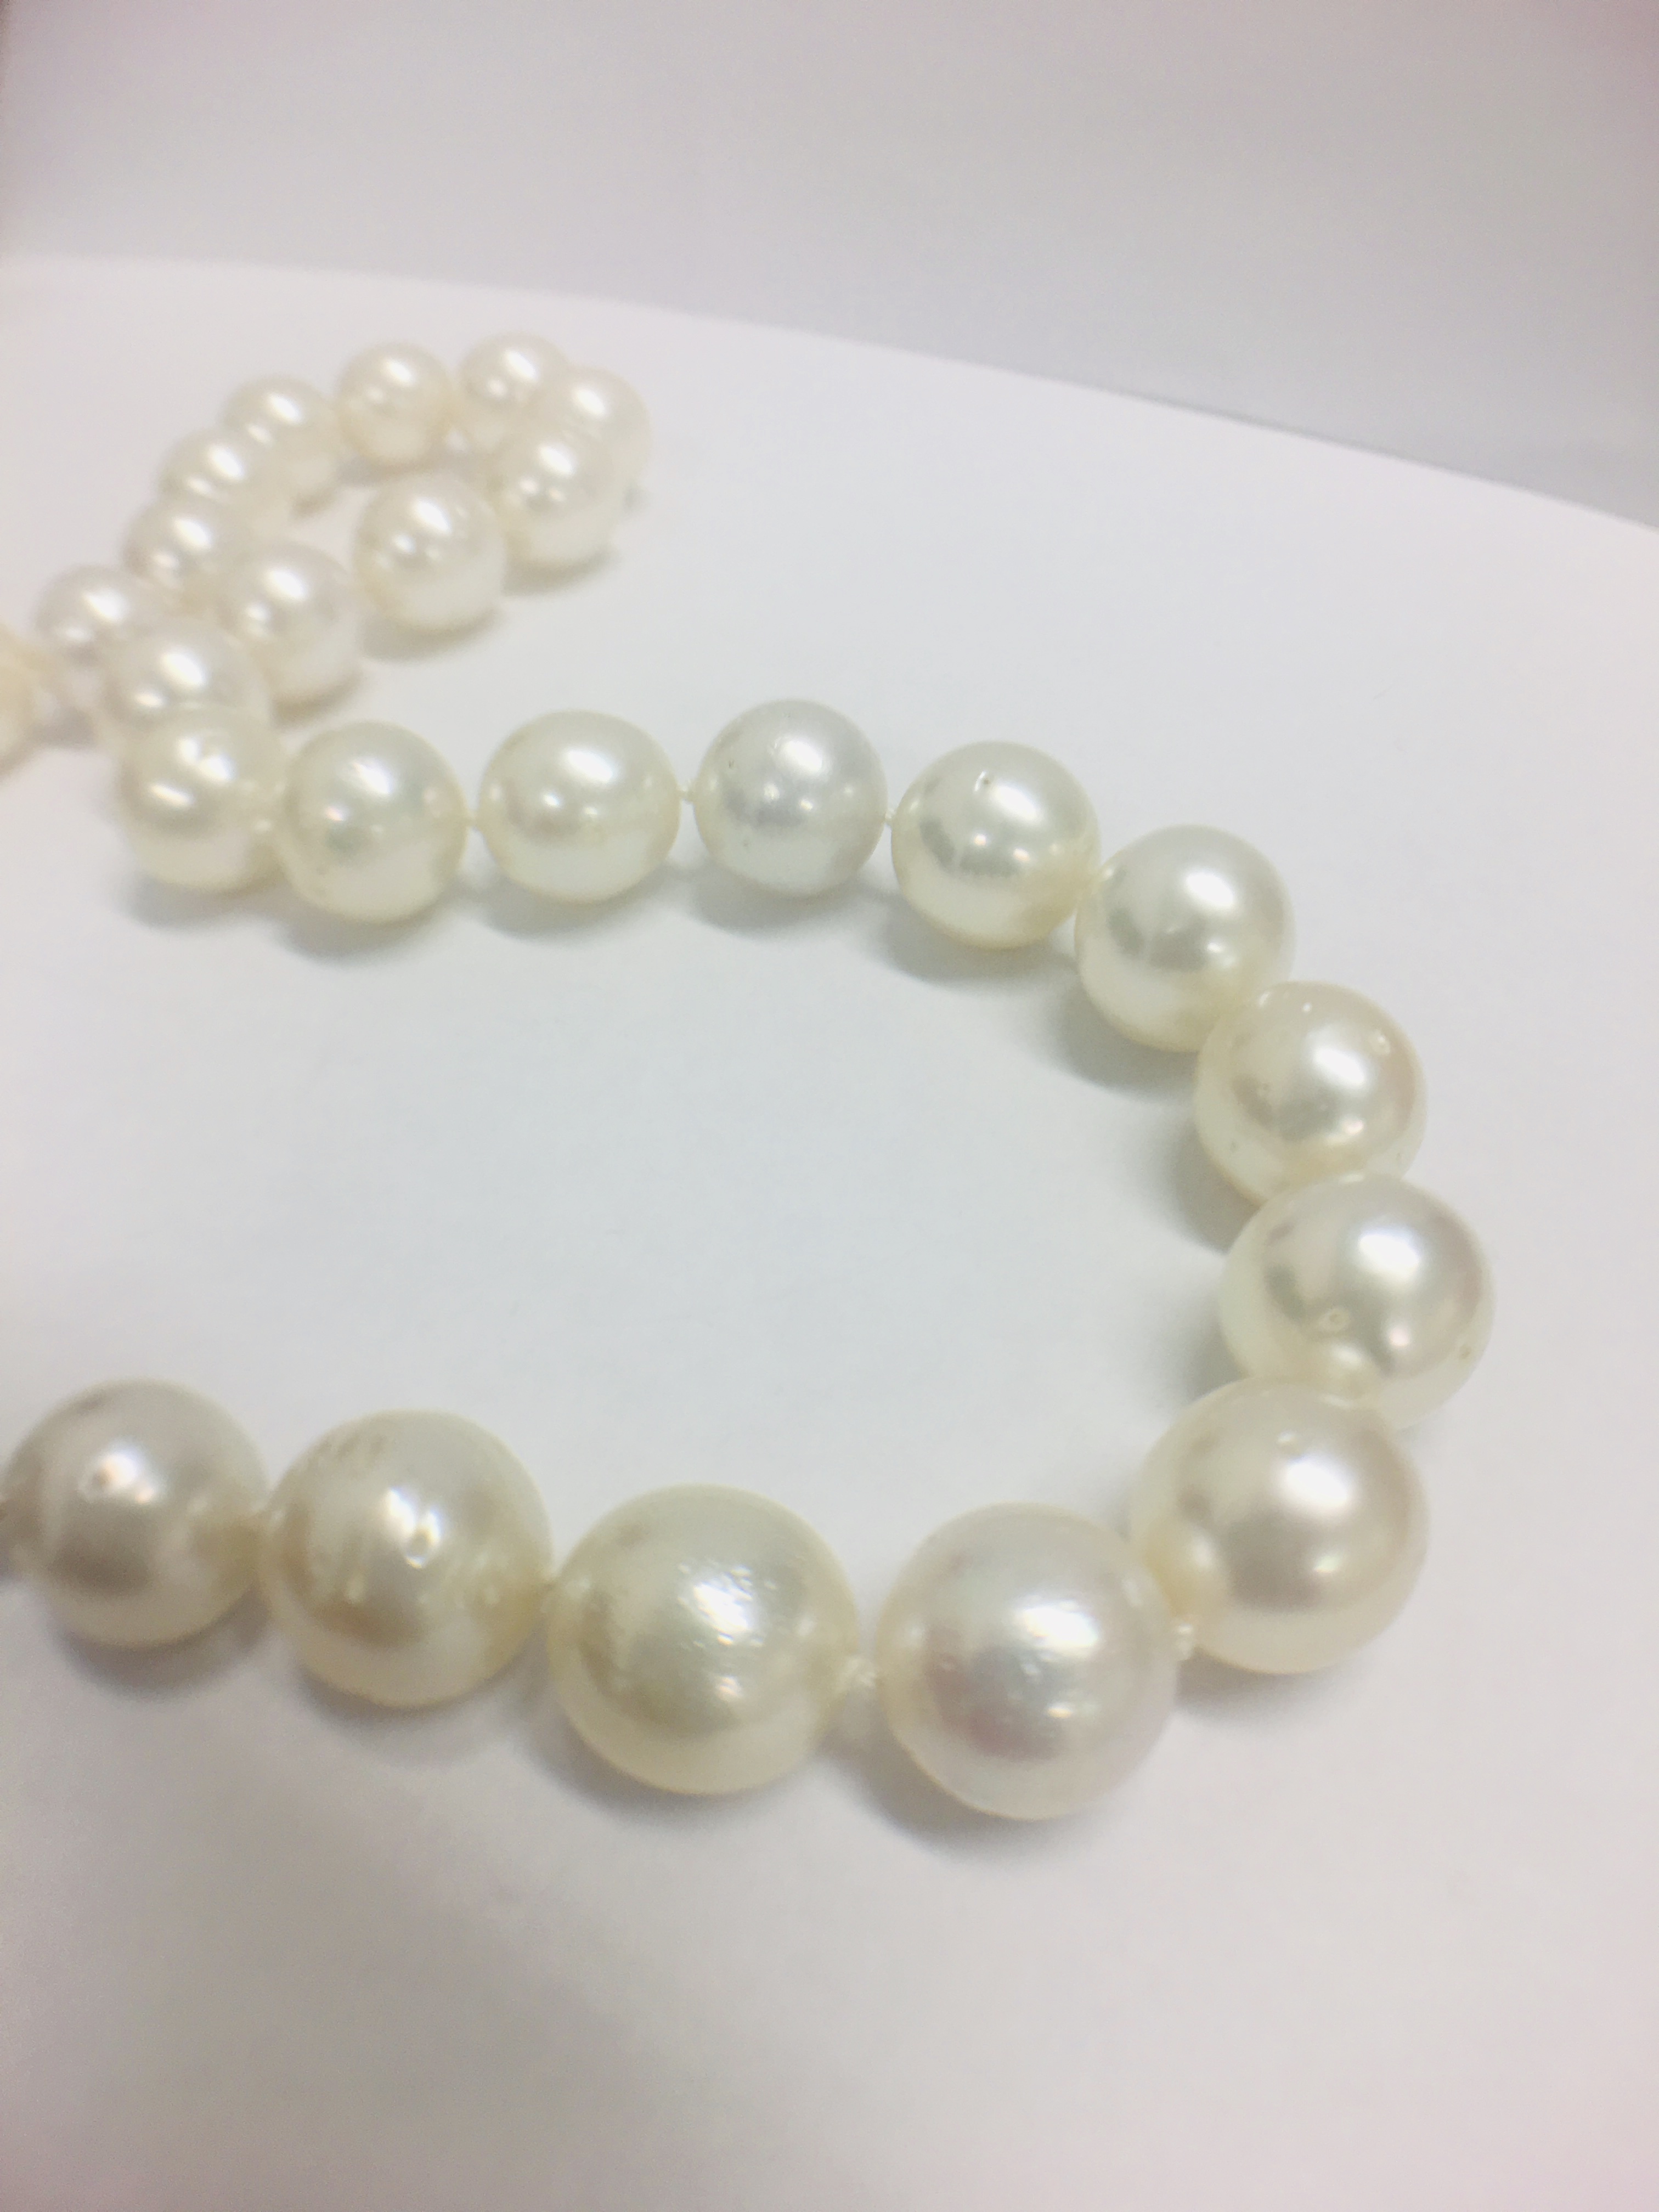 Strand 35 South Sea Pearls With 14Ct White Gold Filagree Style Ball Clasp. - Image 5 of 10